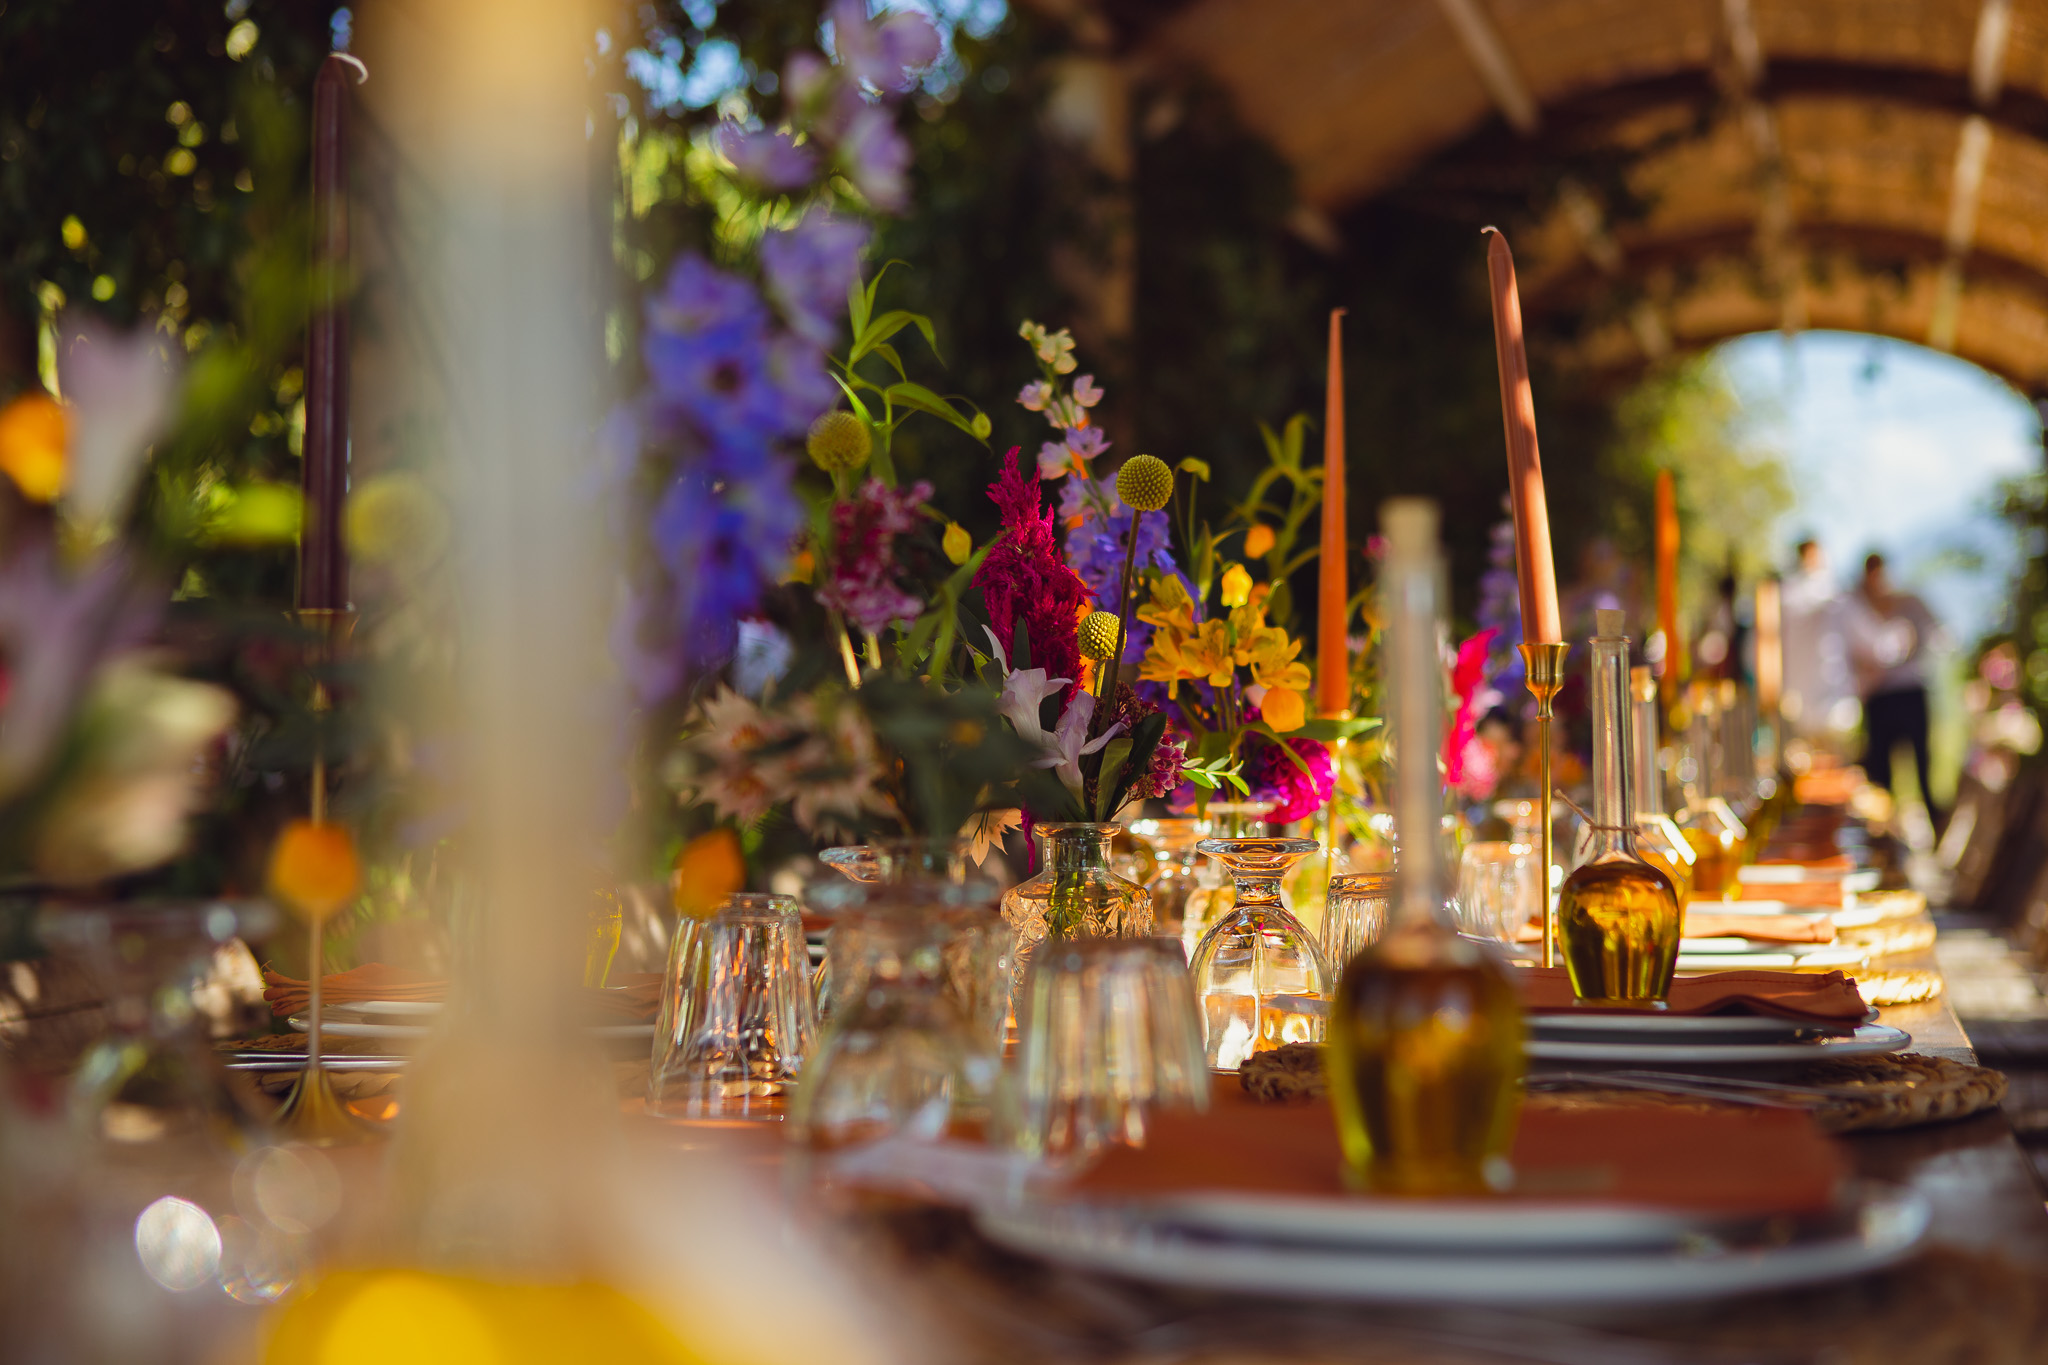 A beautiful wedding dinner place setting with bright flowers and small olive oil bottles at Ambelonas, Corfu